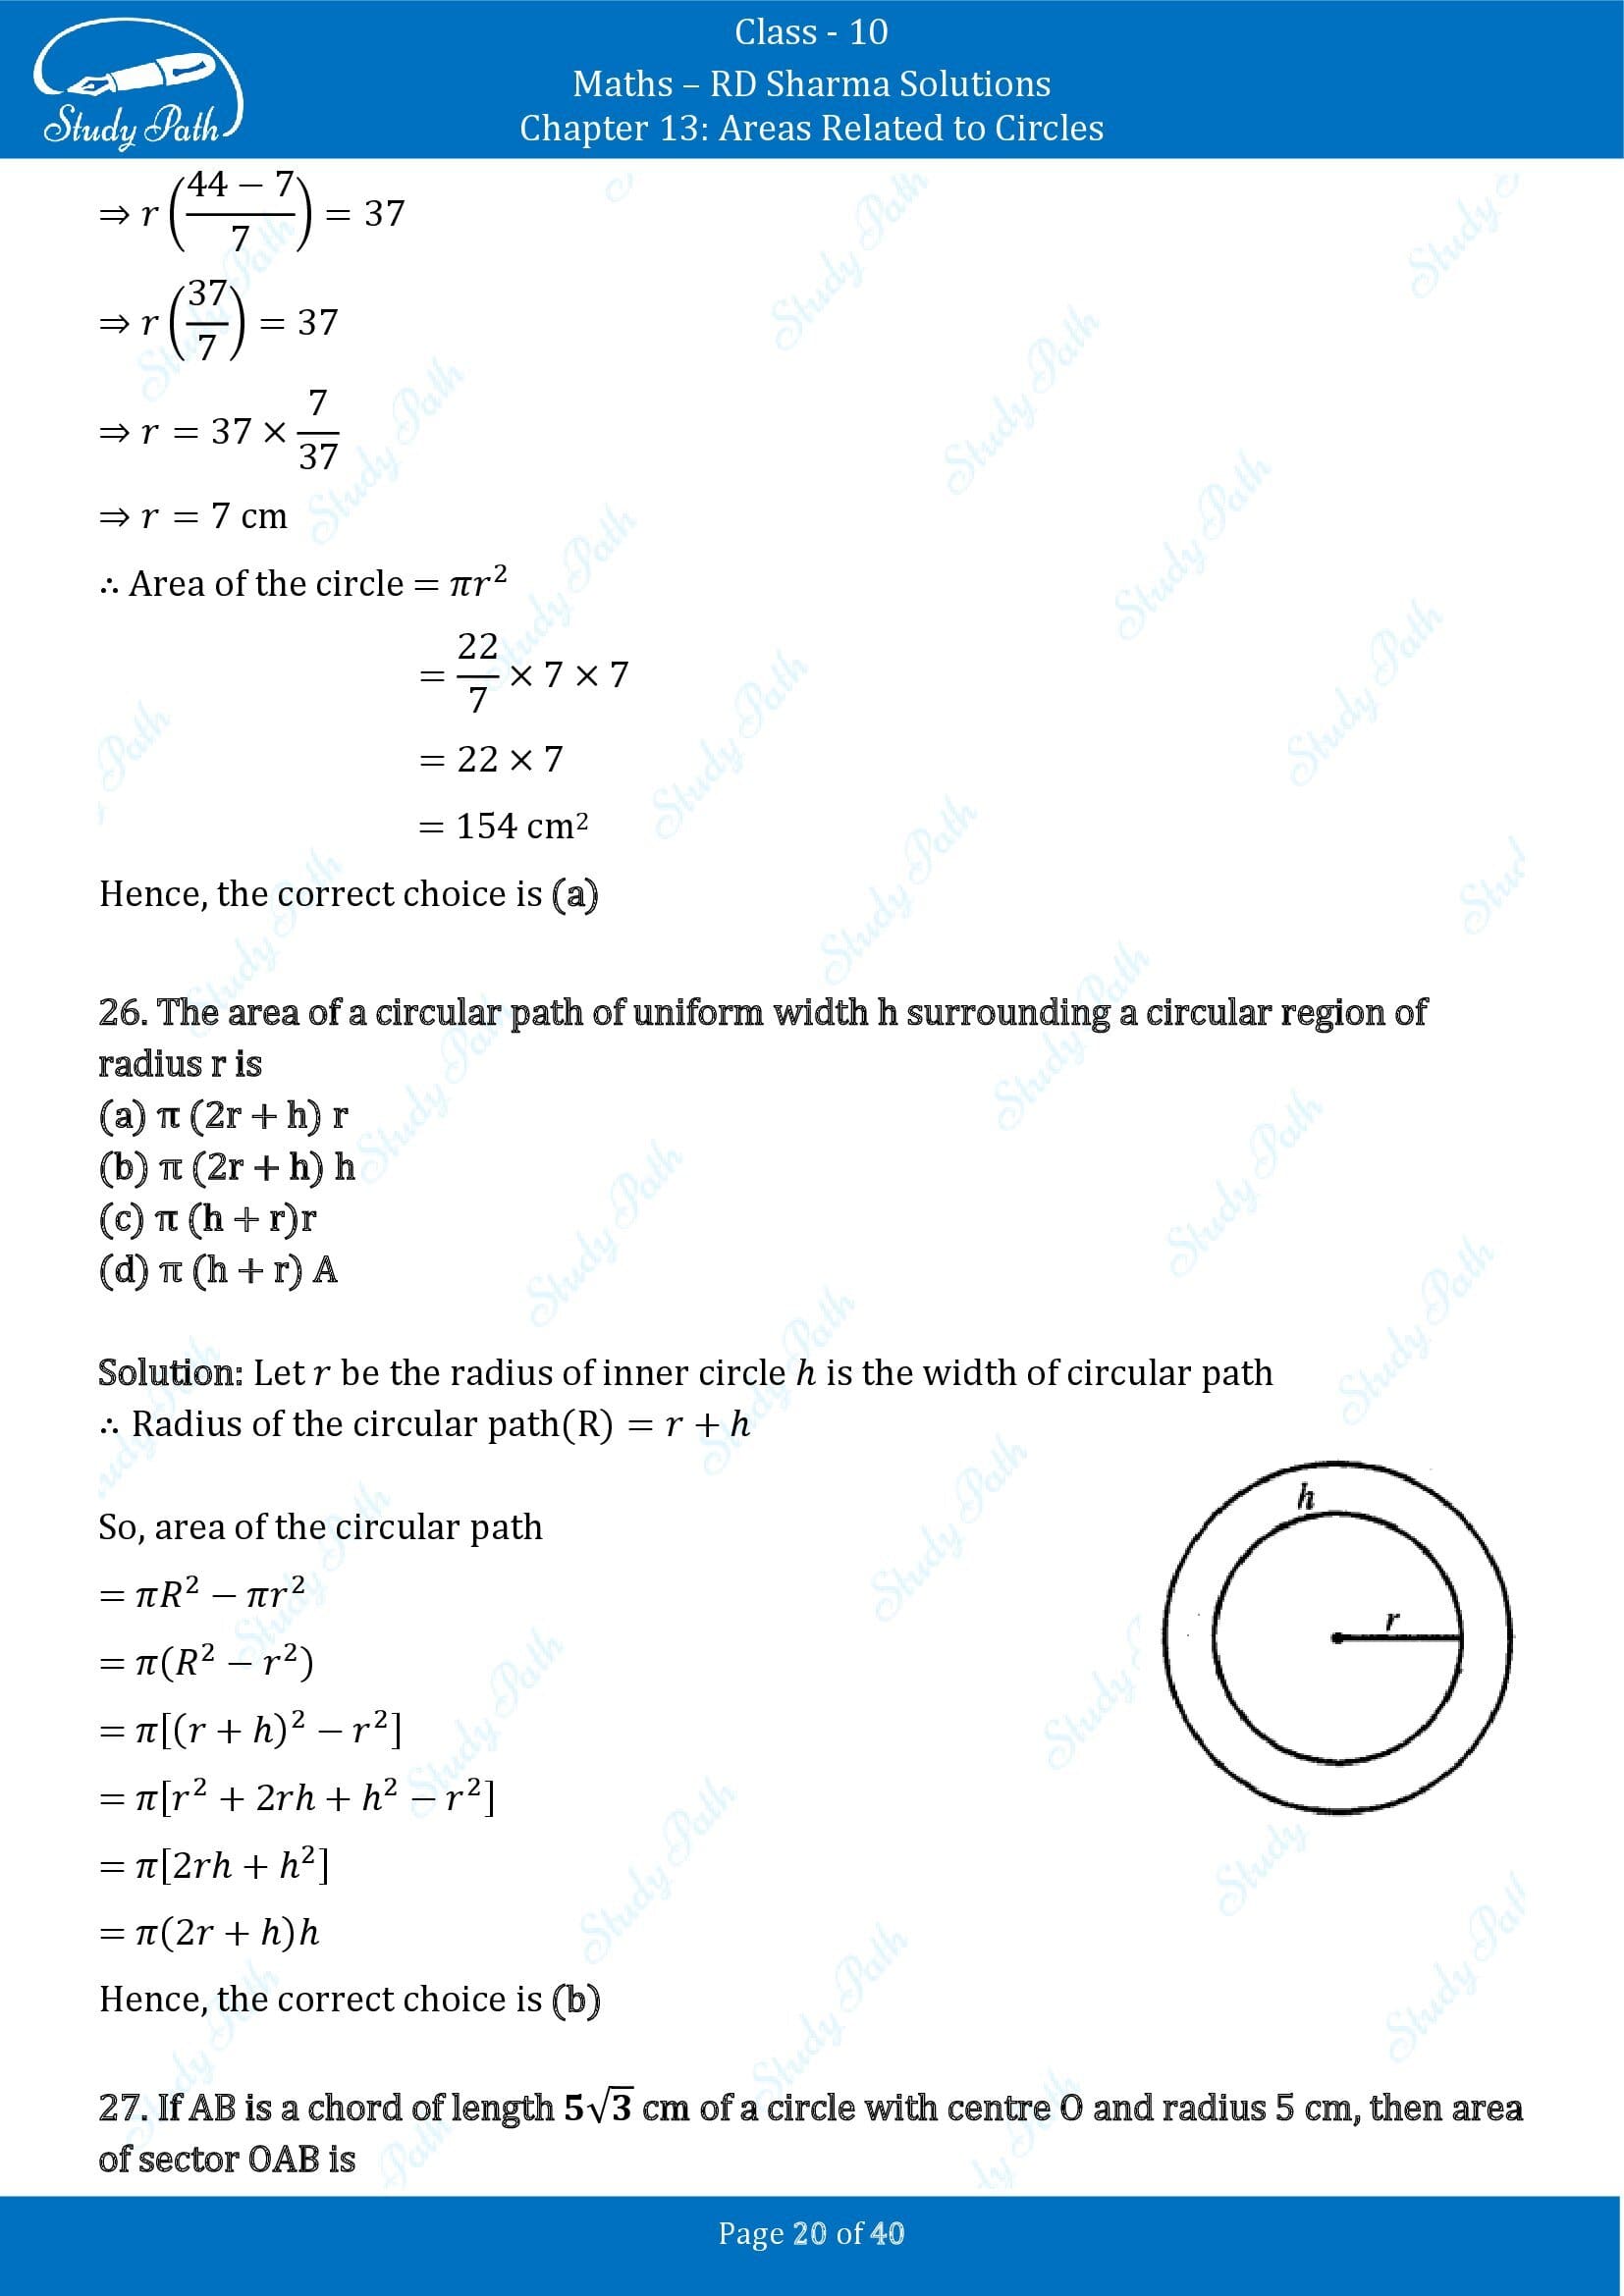 RD Sharma Solutions Class 10 Chapter 13 Areas Related to Circles Multiple Choice Question MCQs 00020